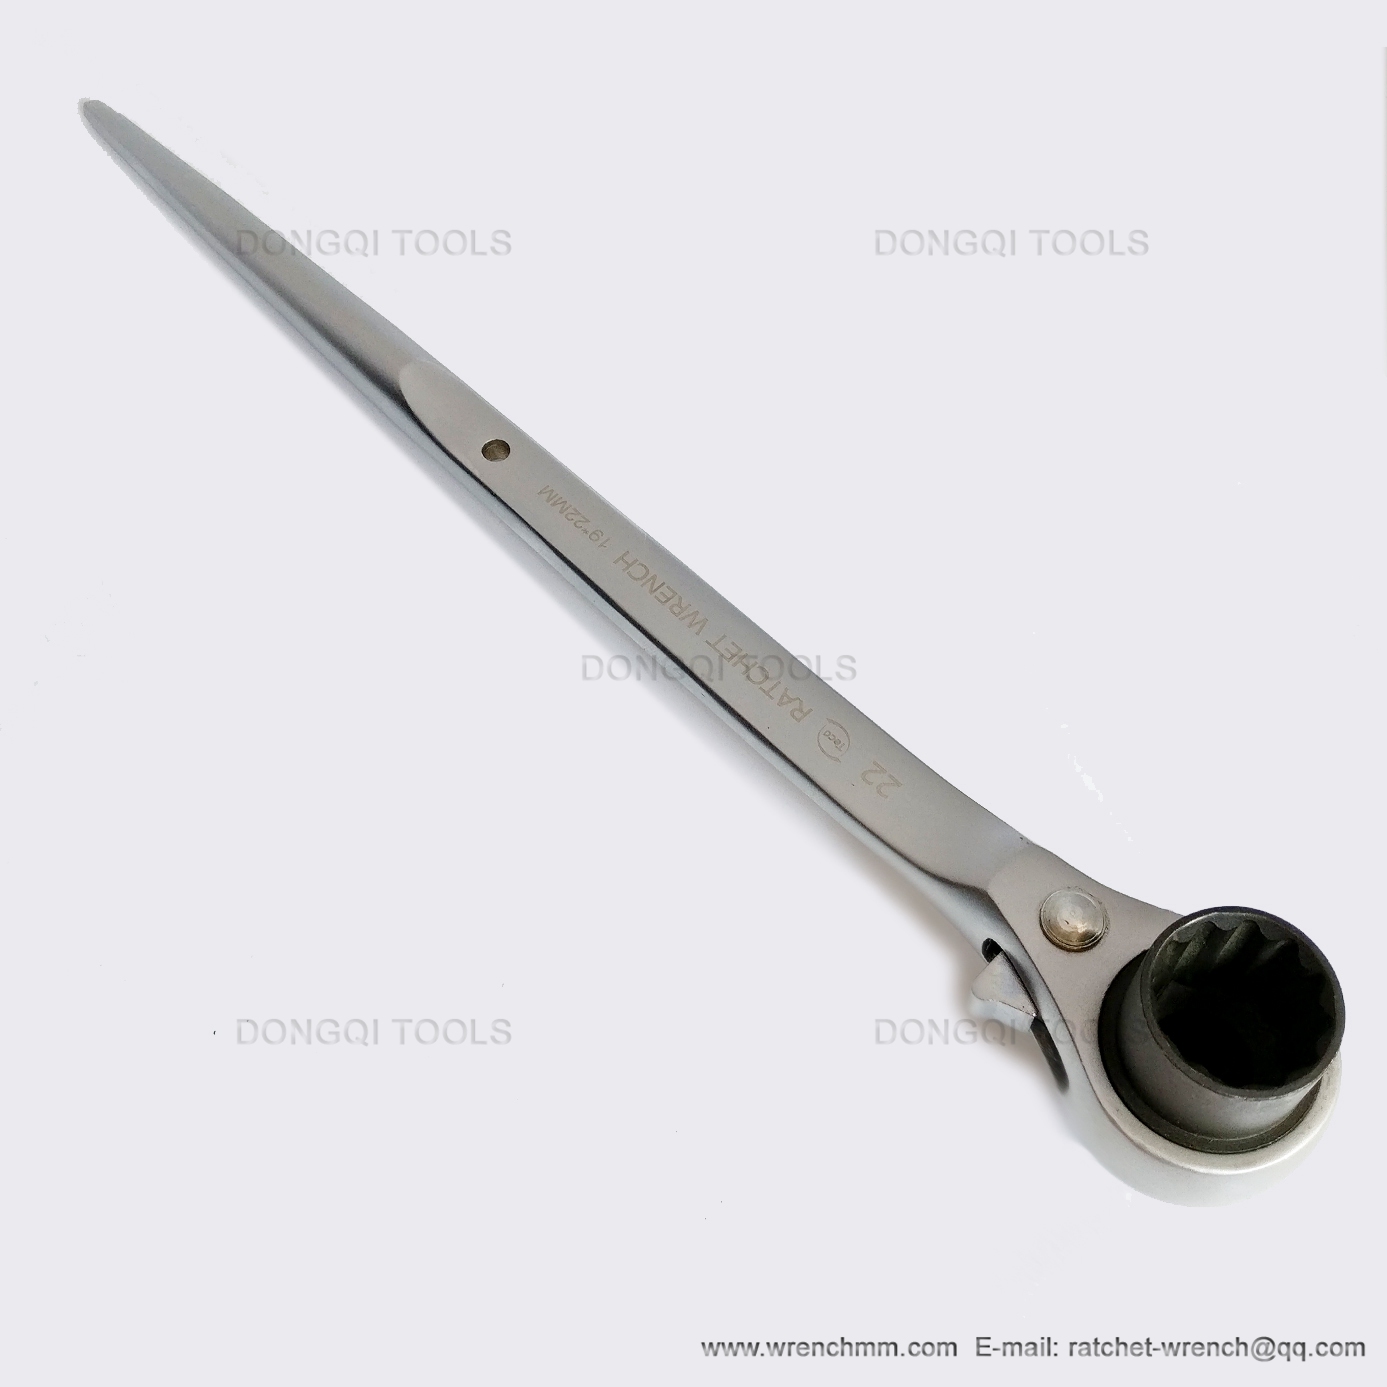 High torque scaffolding spud wrench